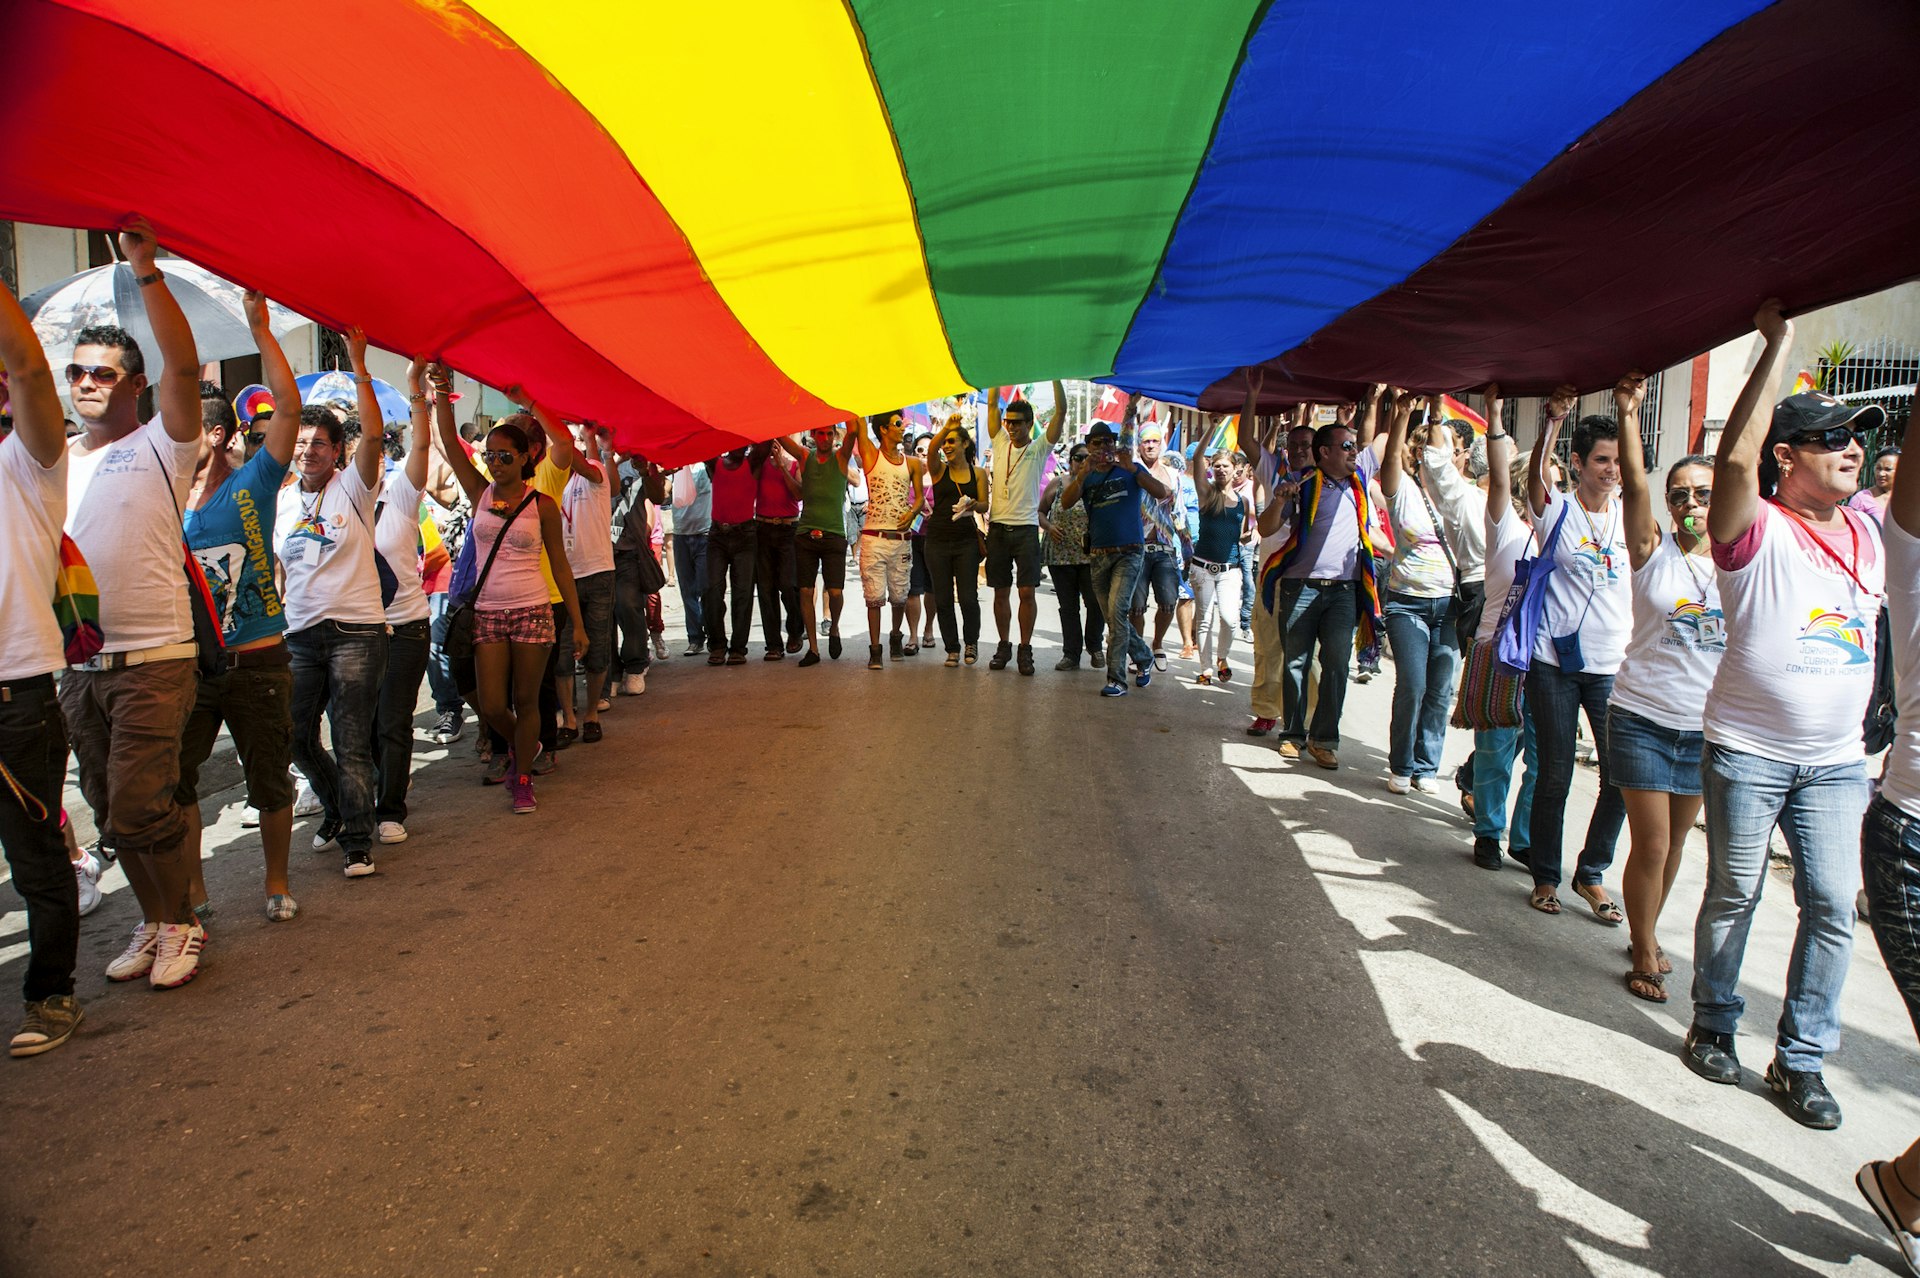 Marchers carry the Gay Pride rainbow-colored flag down a street